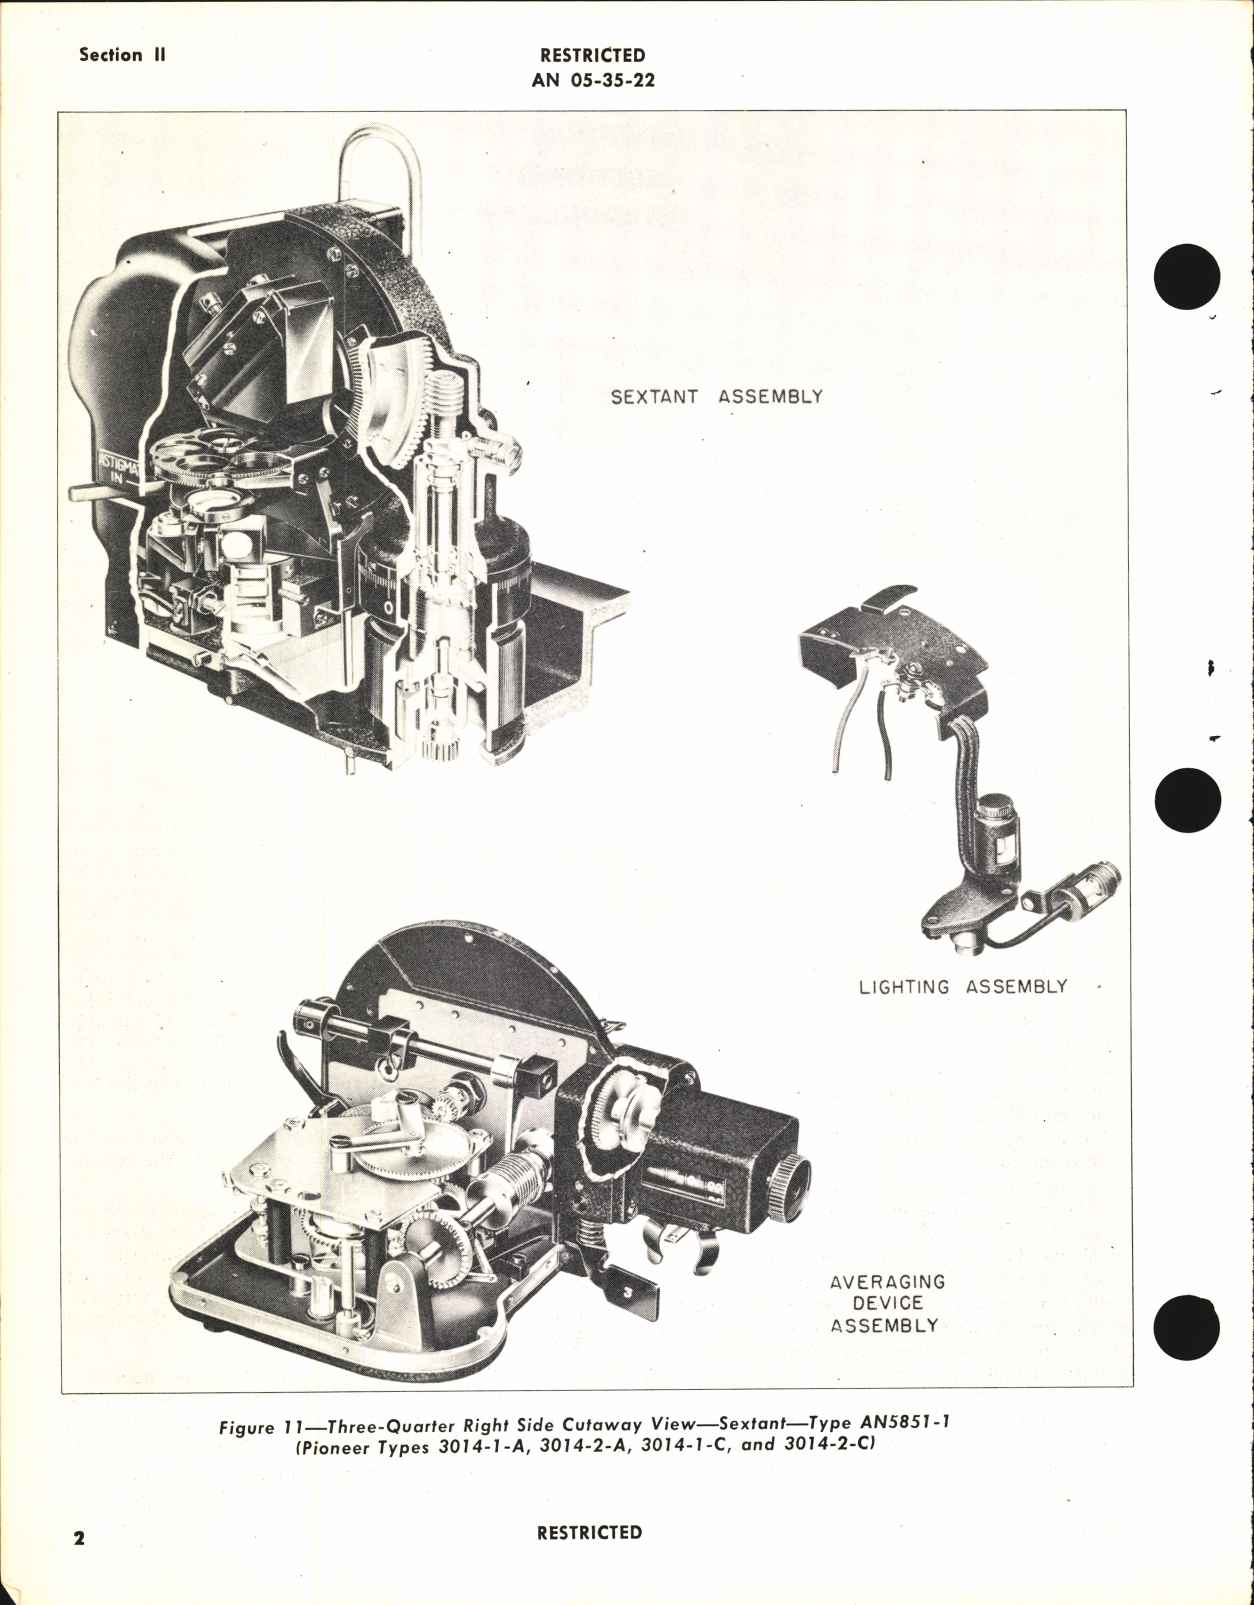 Sample page 6 from AirCorps Library document: Operation, Service, & Overhaul Instructions with Parts Catalog for Aircraft Sextant Type AN 5851-1